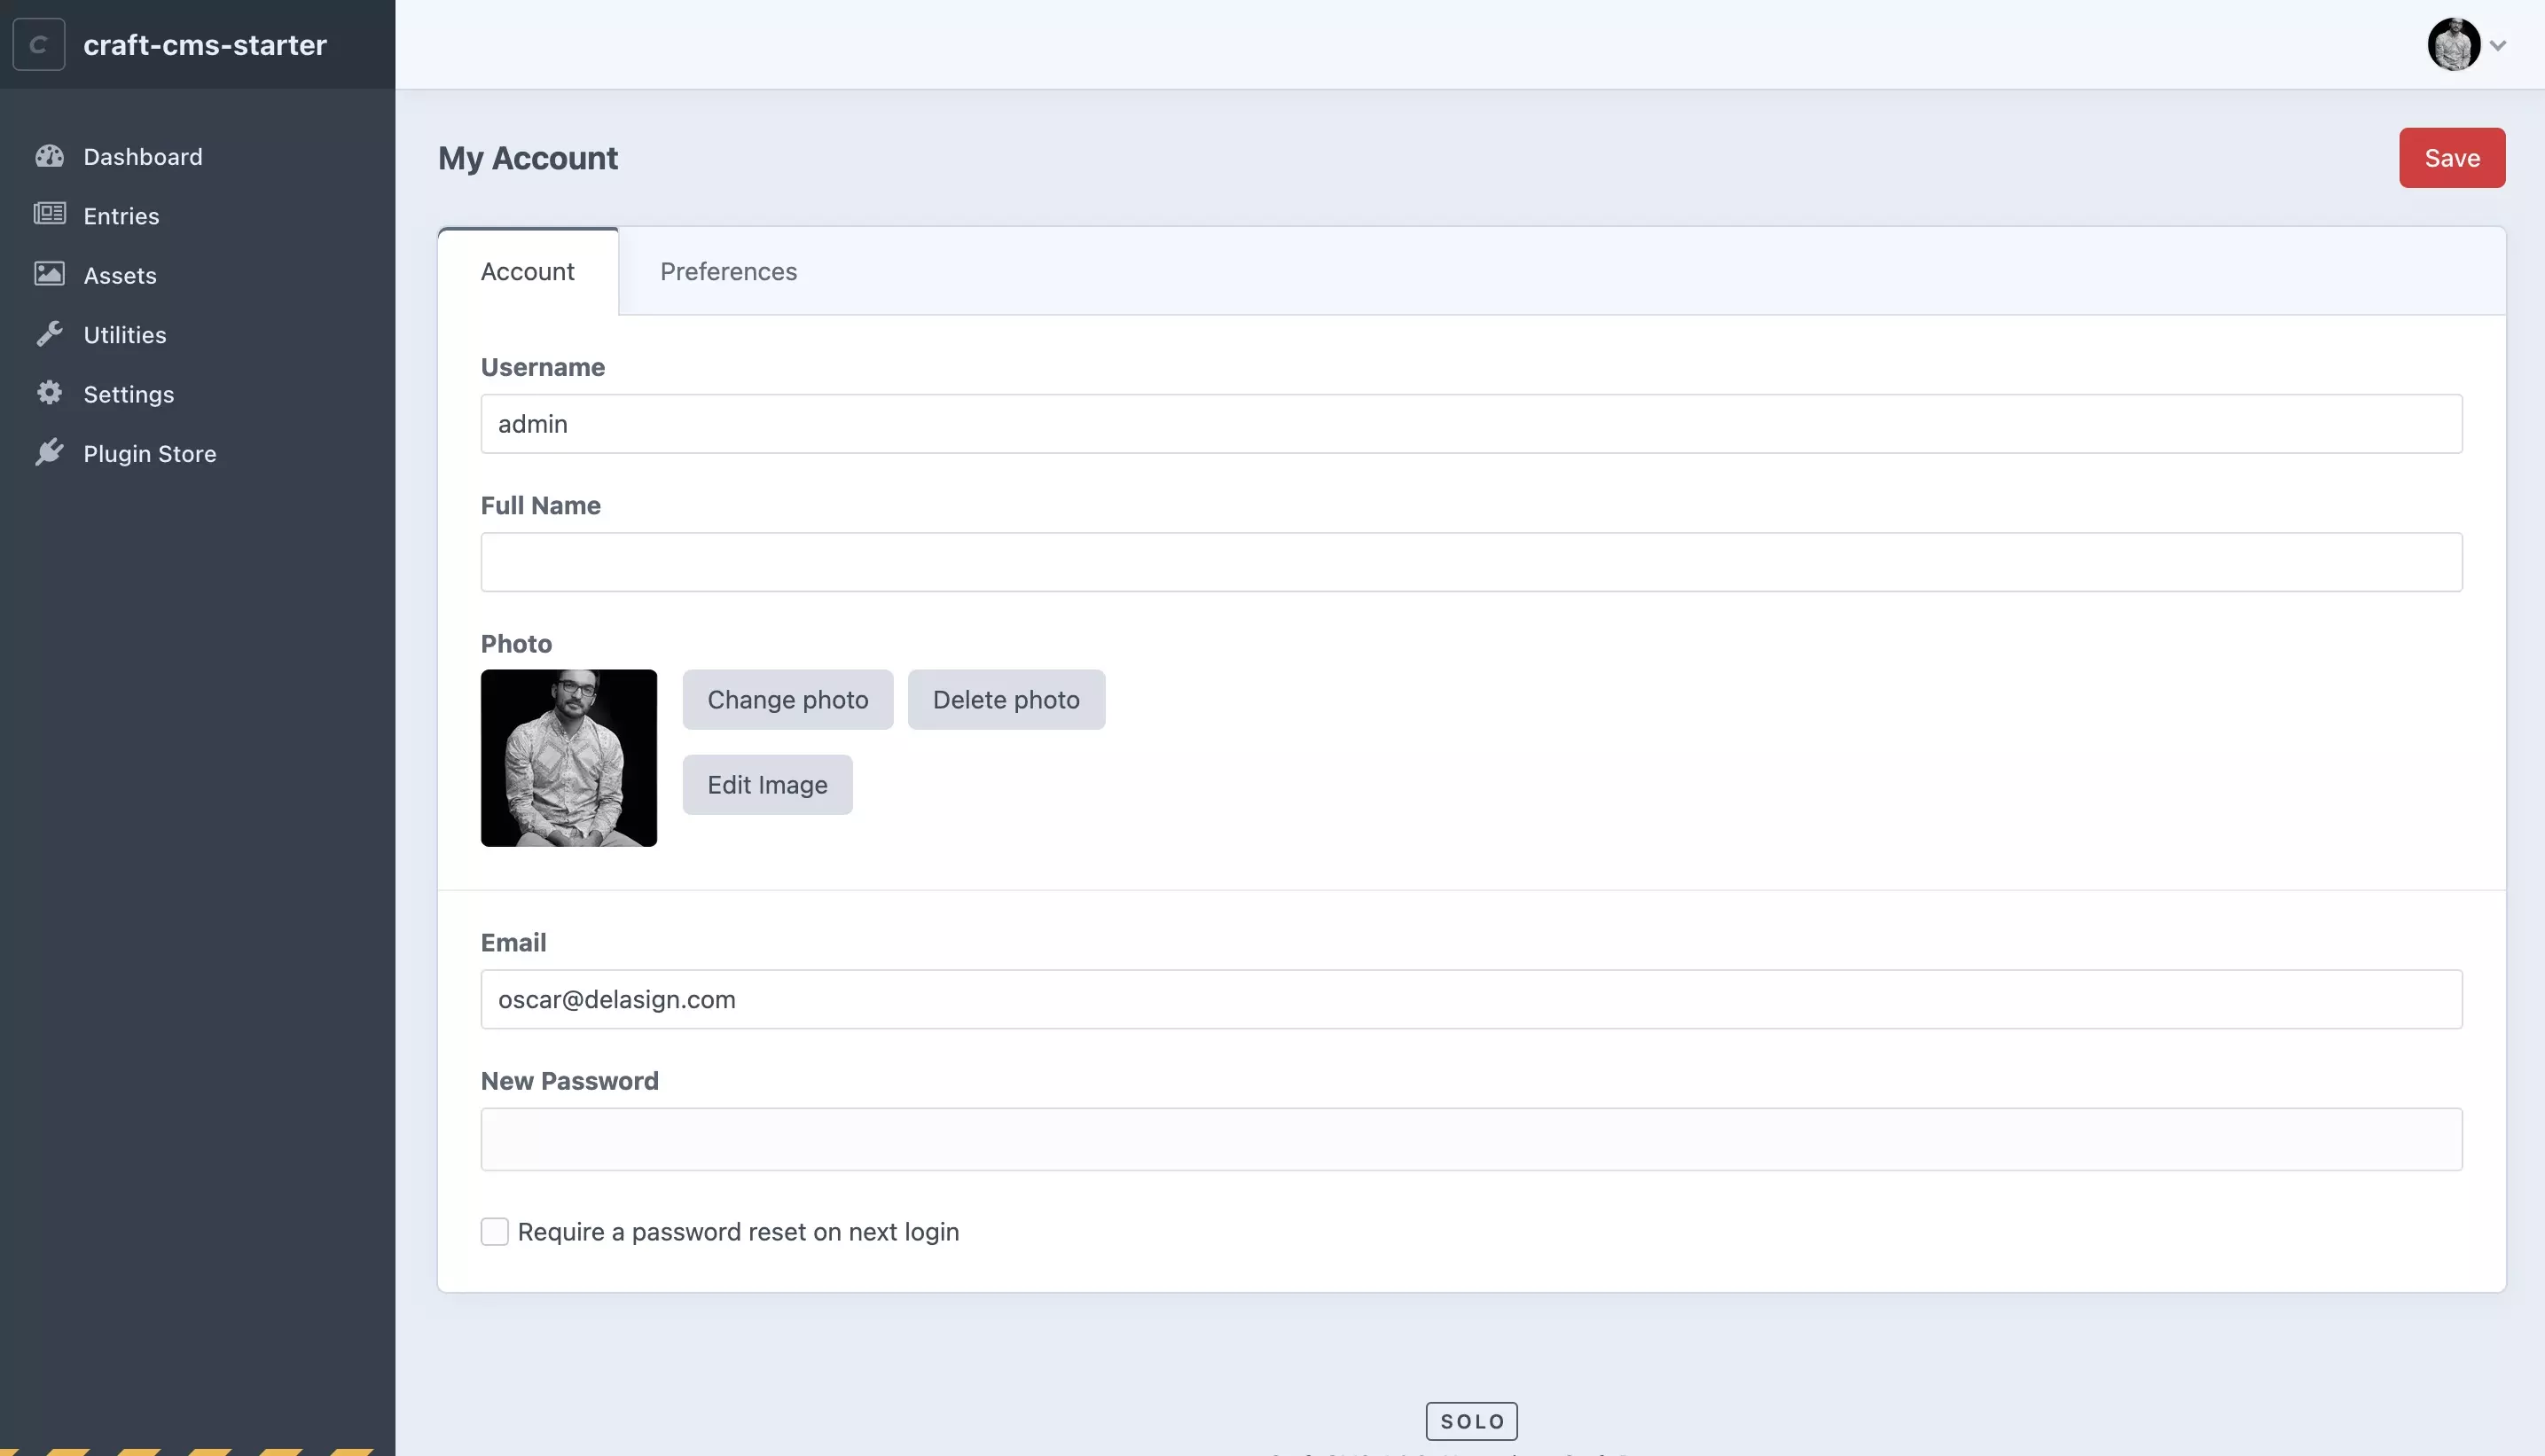 A screenshot of the Craft CMS Admin account screen showing the uploaded photo under photo as well as on the top right.